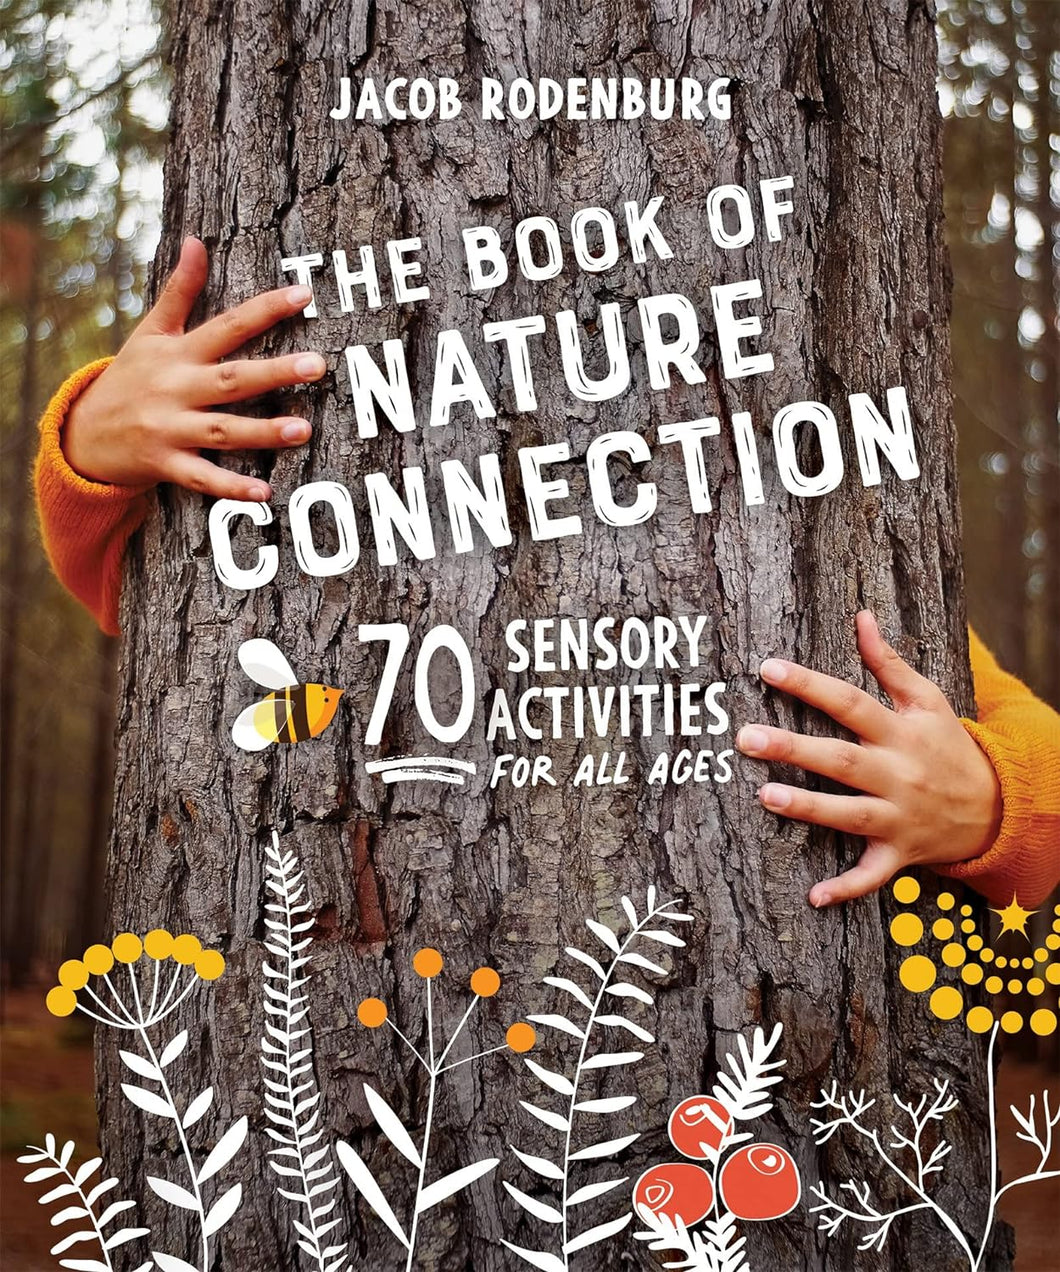 The book of Nature Connection 70 Sensory Activities for